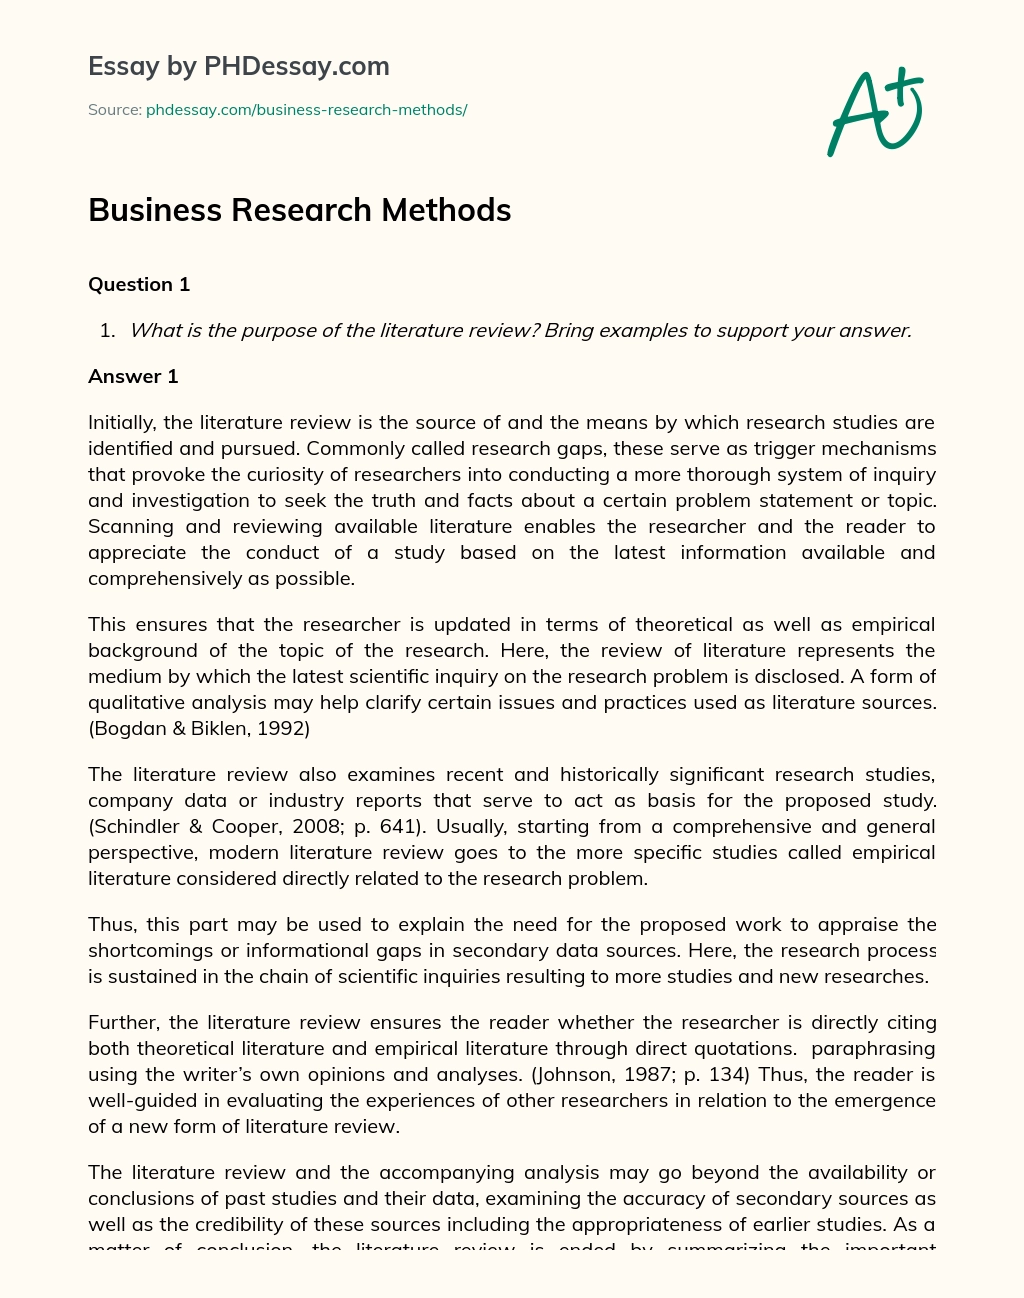 Business Research Methods essay